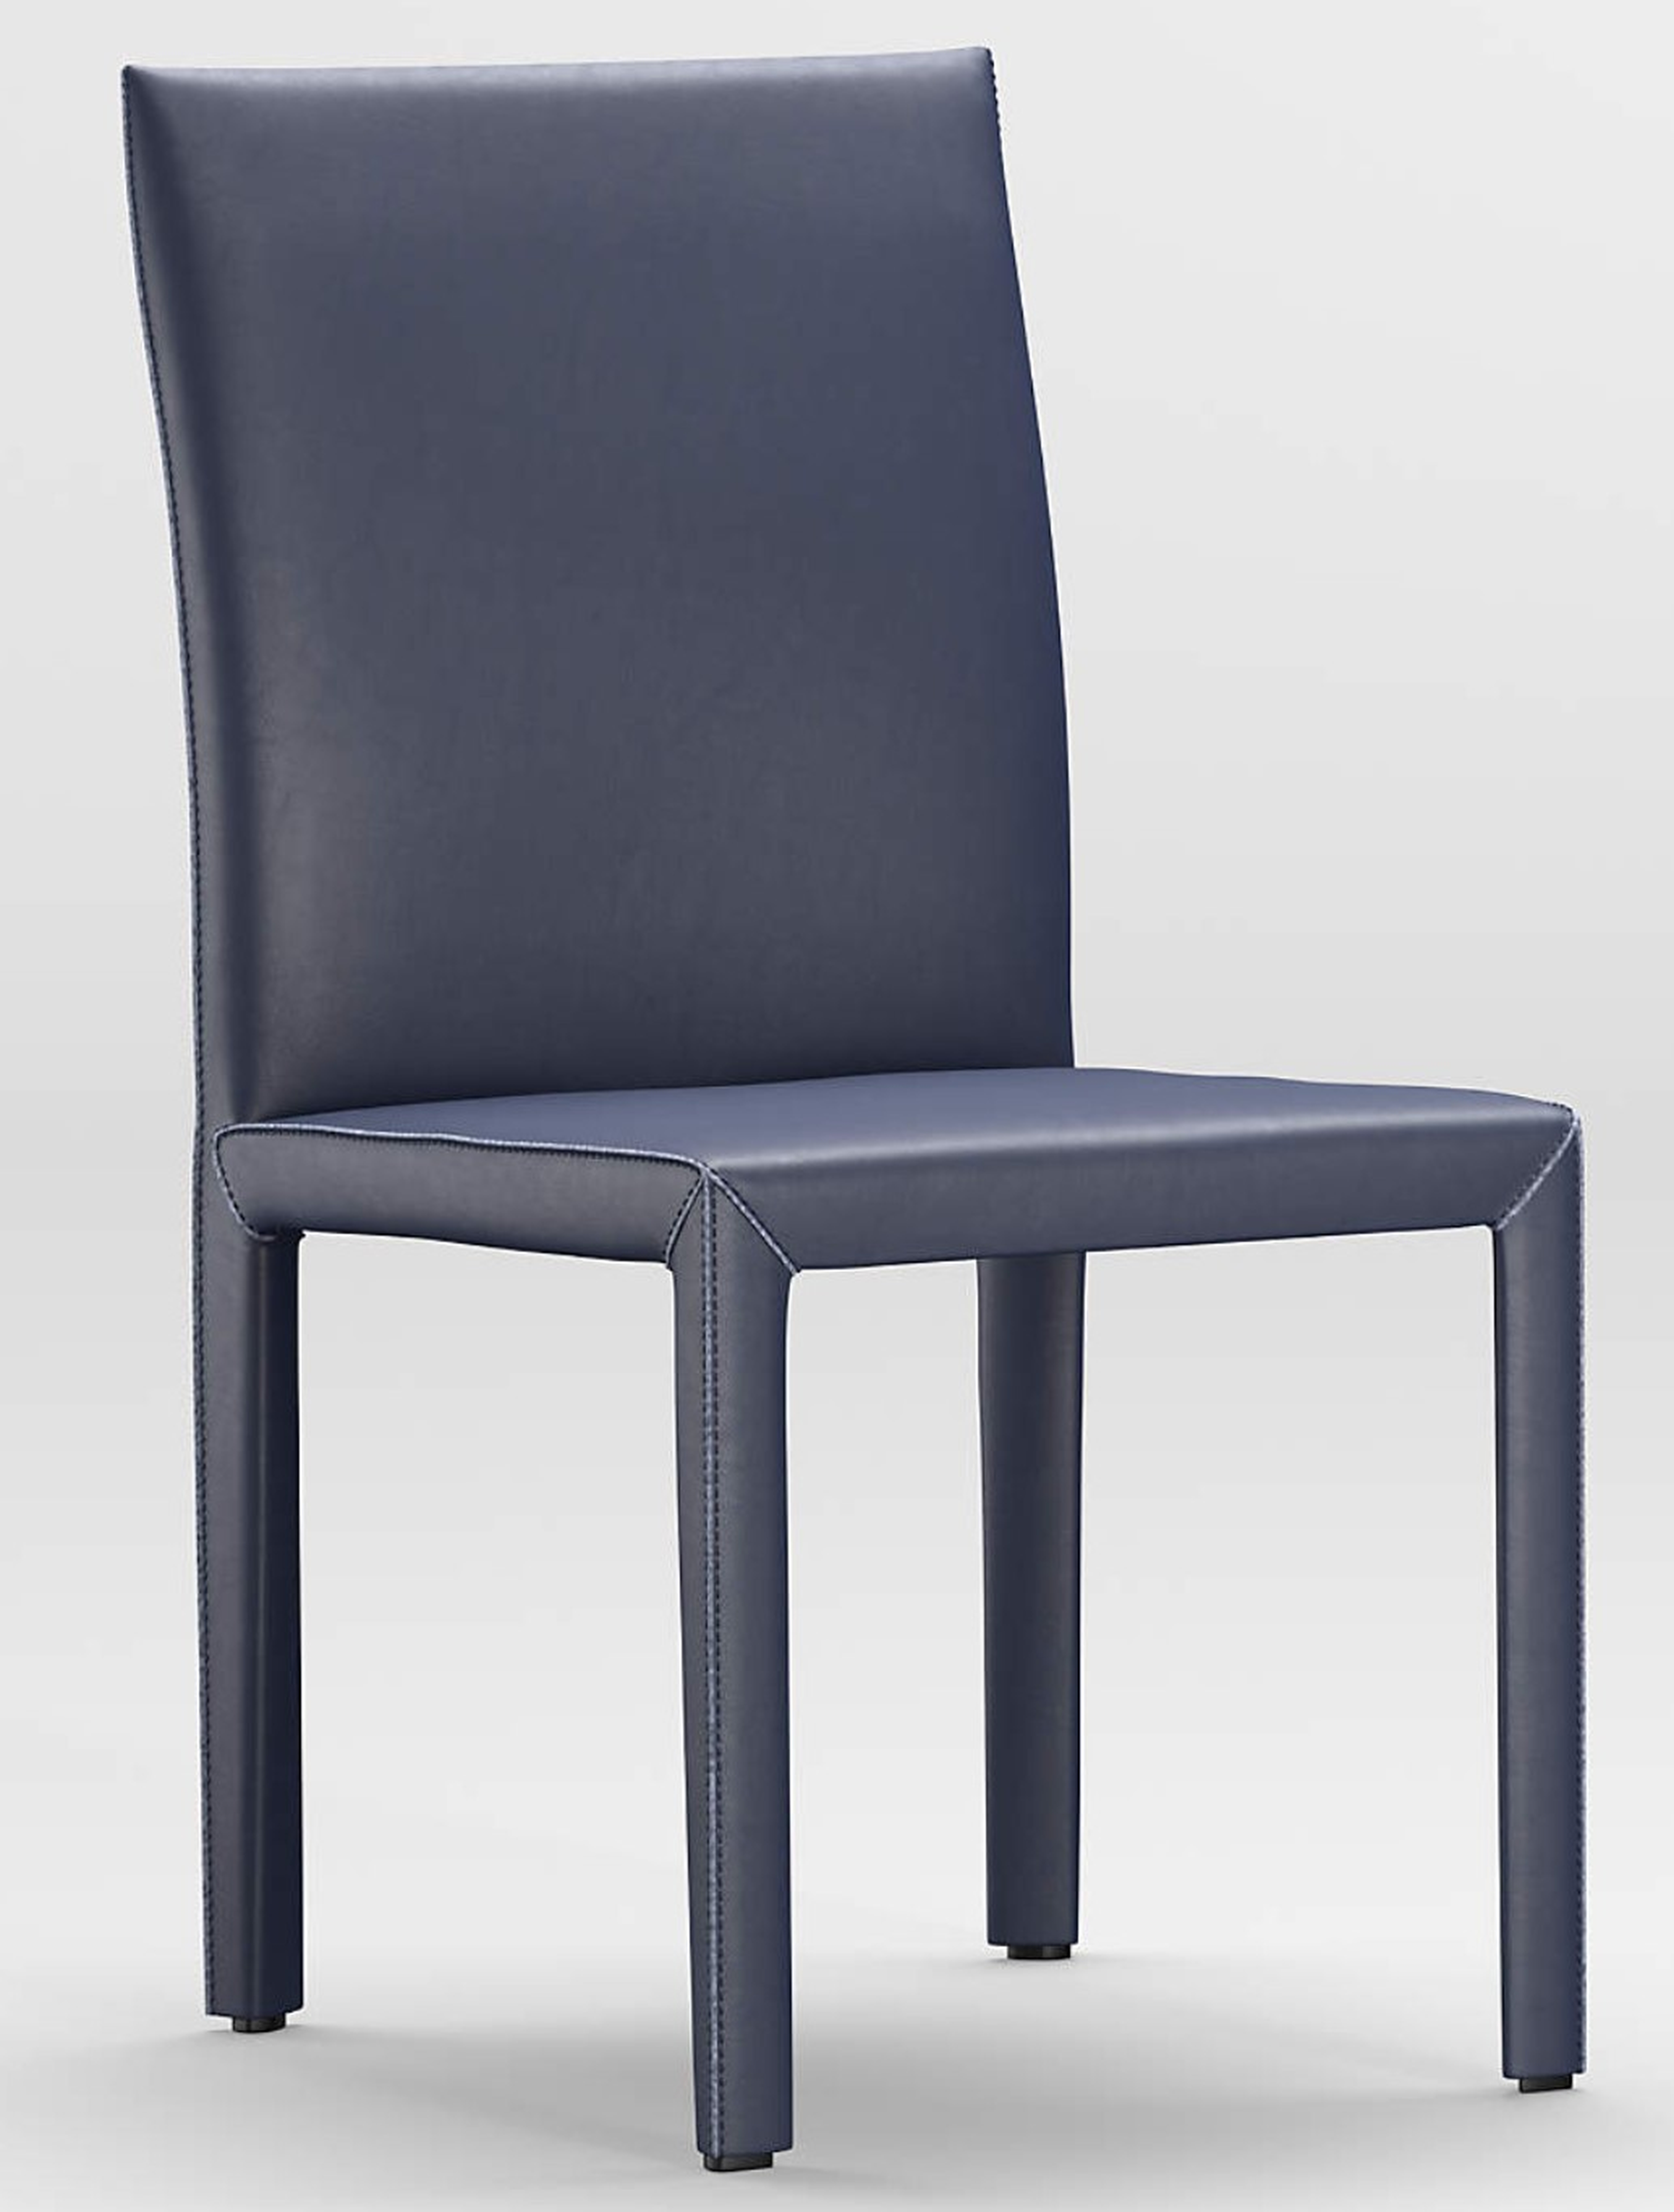 Folio Deep Blue Top-Grain Leather Dining Chair - Crate and Barrel